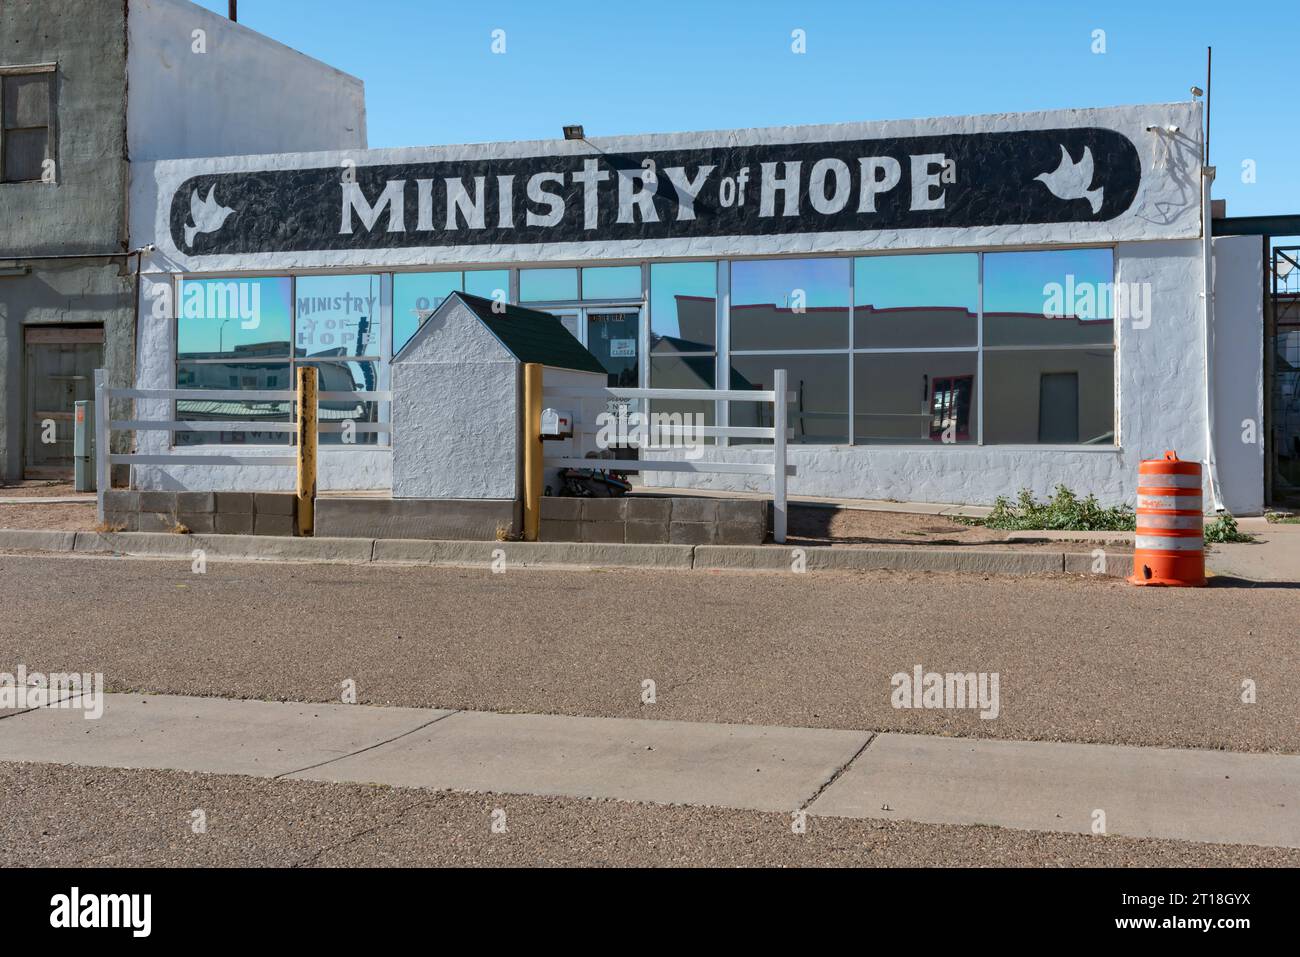 Ministry of Hope, a non-profit, organization that provides food and aid to people in need, established 2007, Tucumcari, New Mexico, United States. Stock Photo